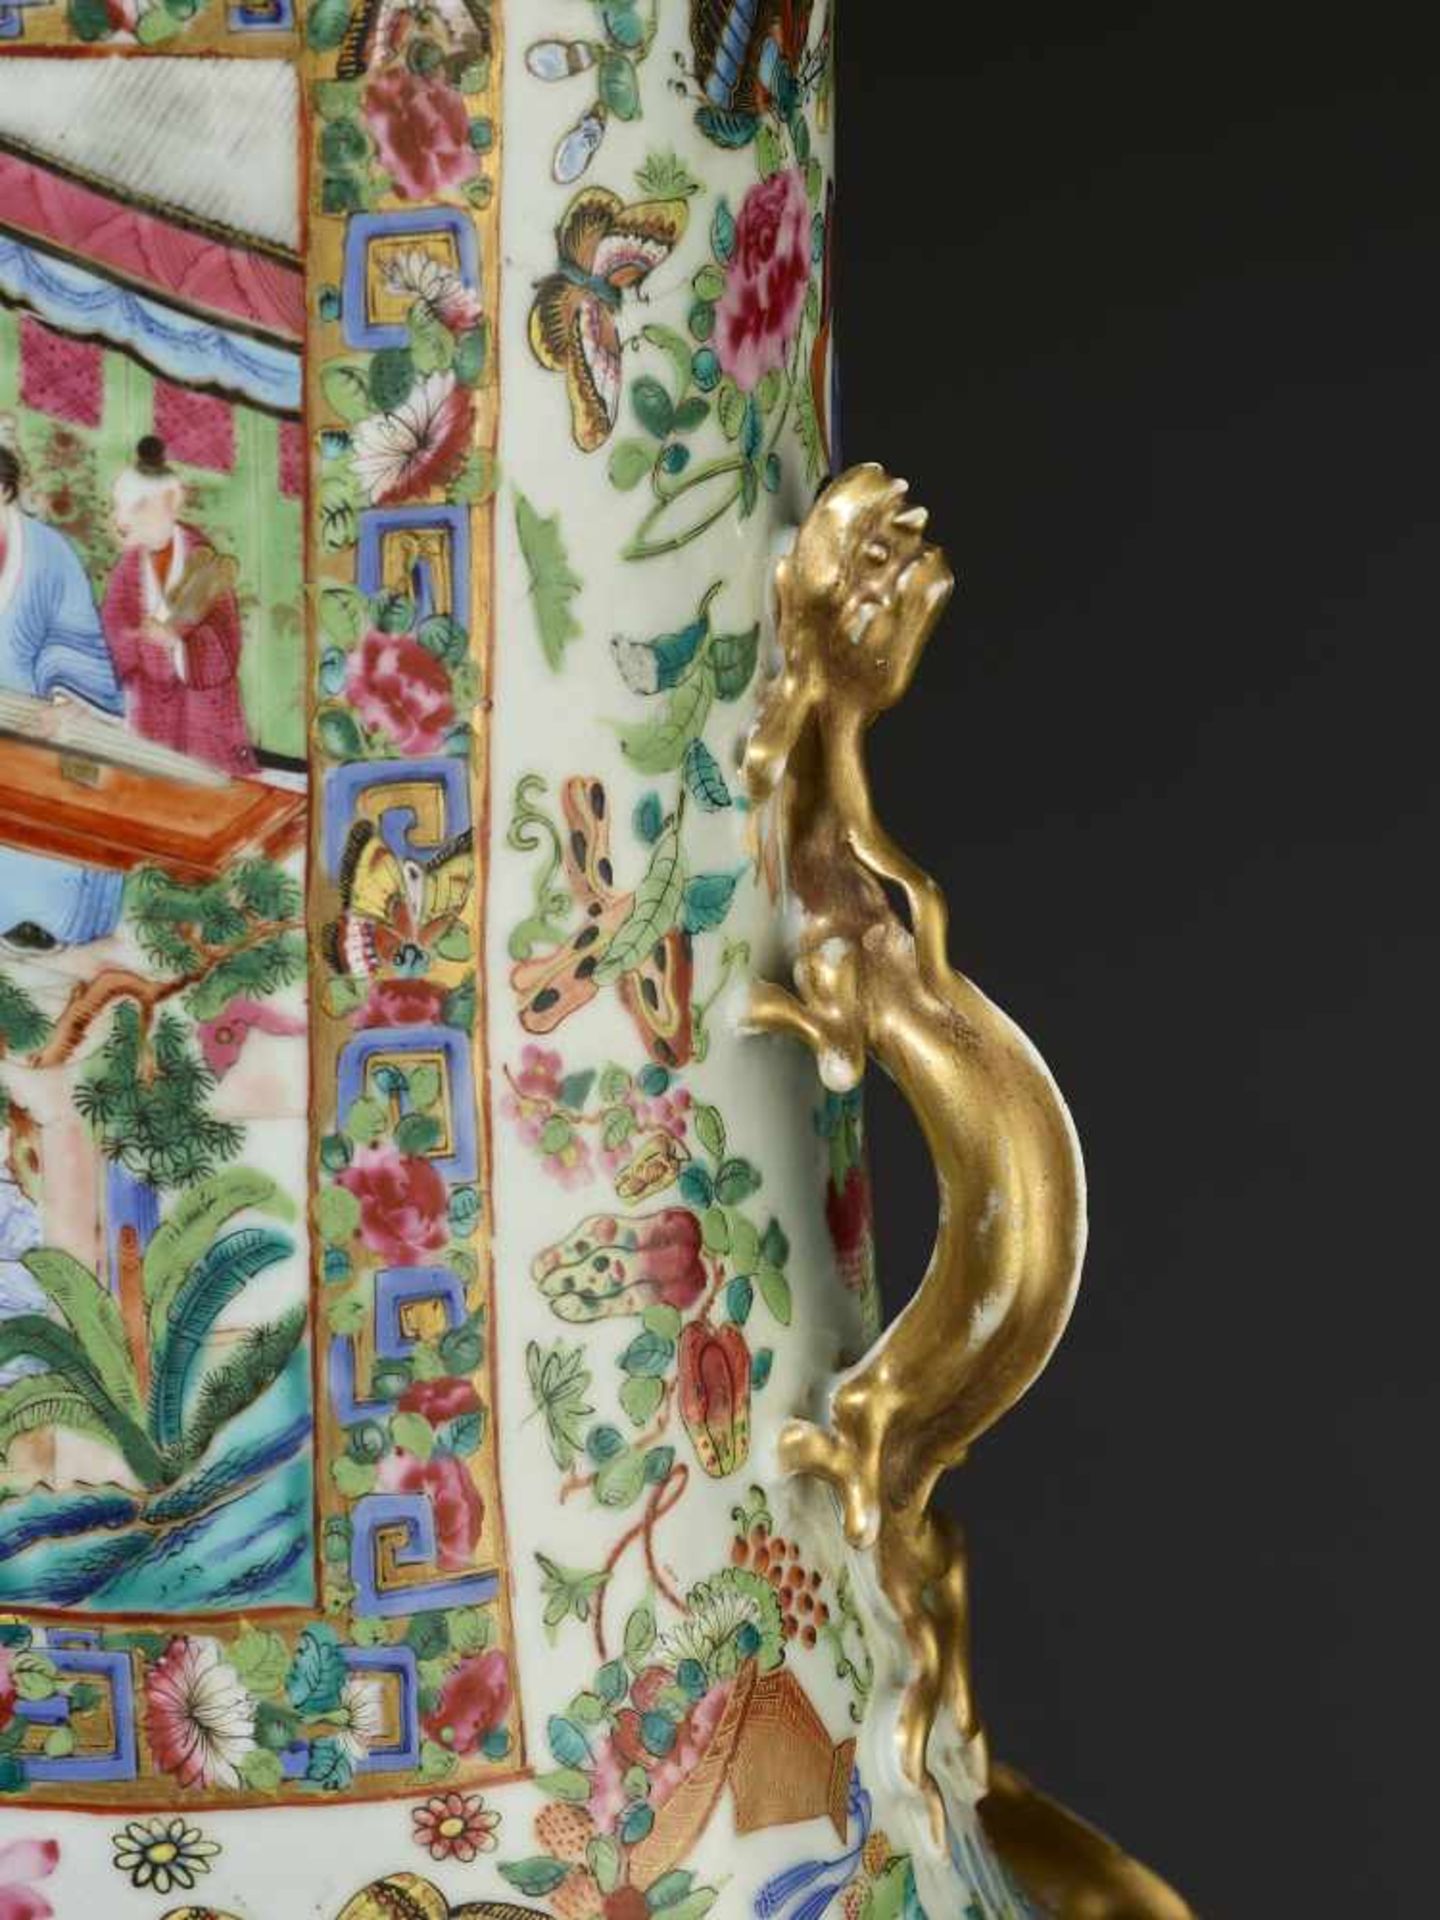 TWO LARGE WATER MARGIN VASES, 1850sChina, mid-19th century. Painted in bright enamels from the - Image 21 of 21